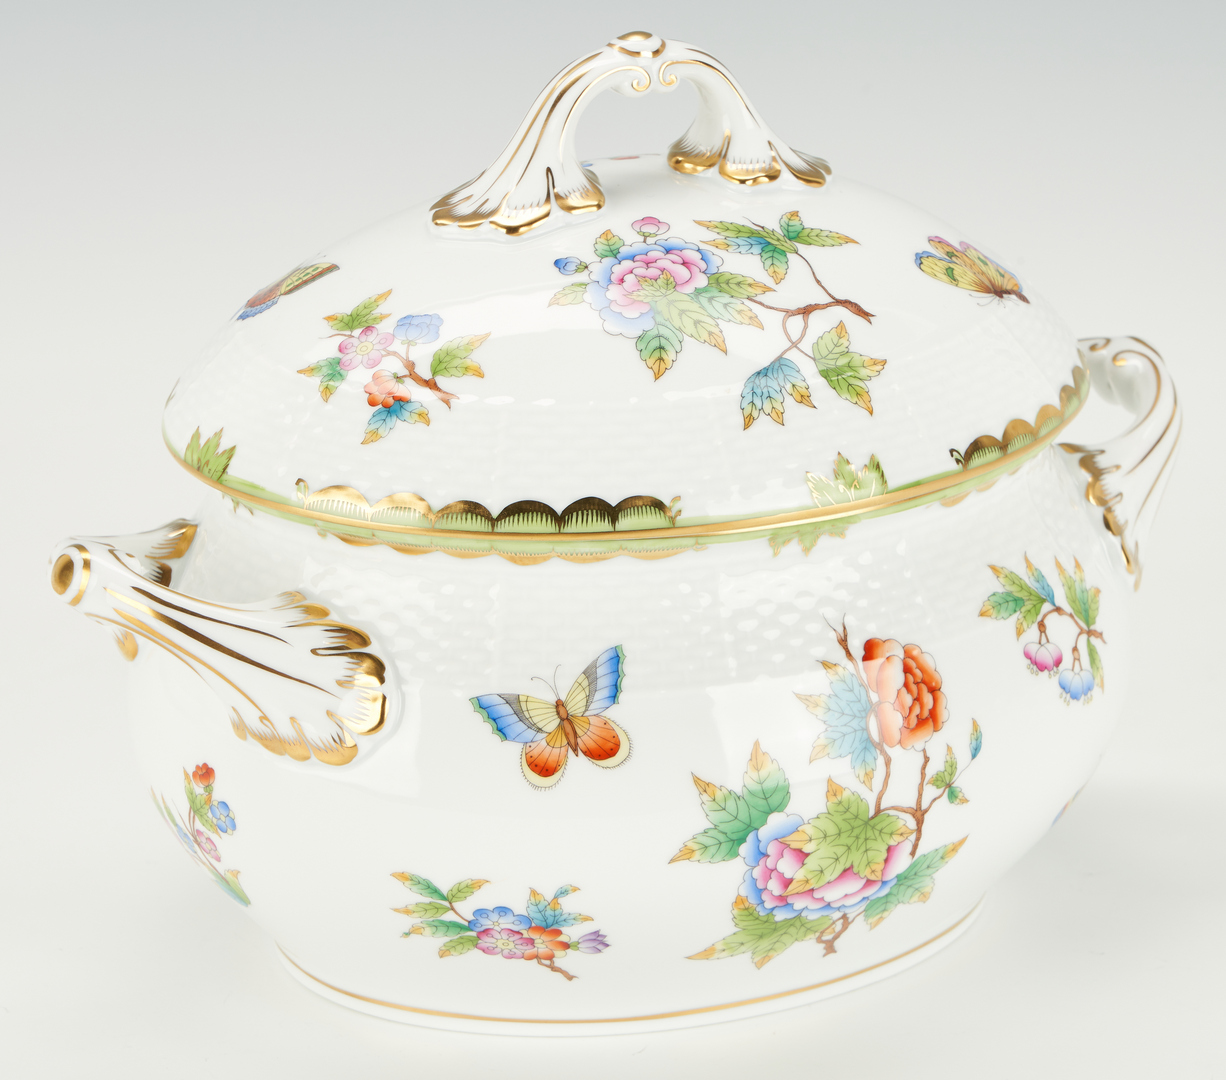 Lot 365: 10 Herend Queen Victoria Table Service Items, incl. Lidded Tureen